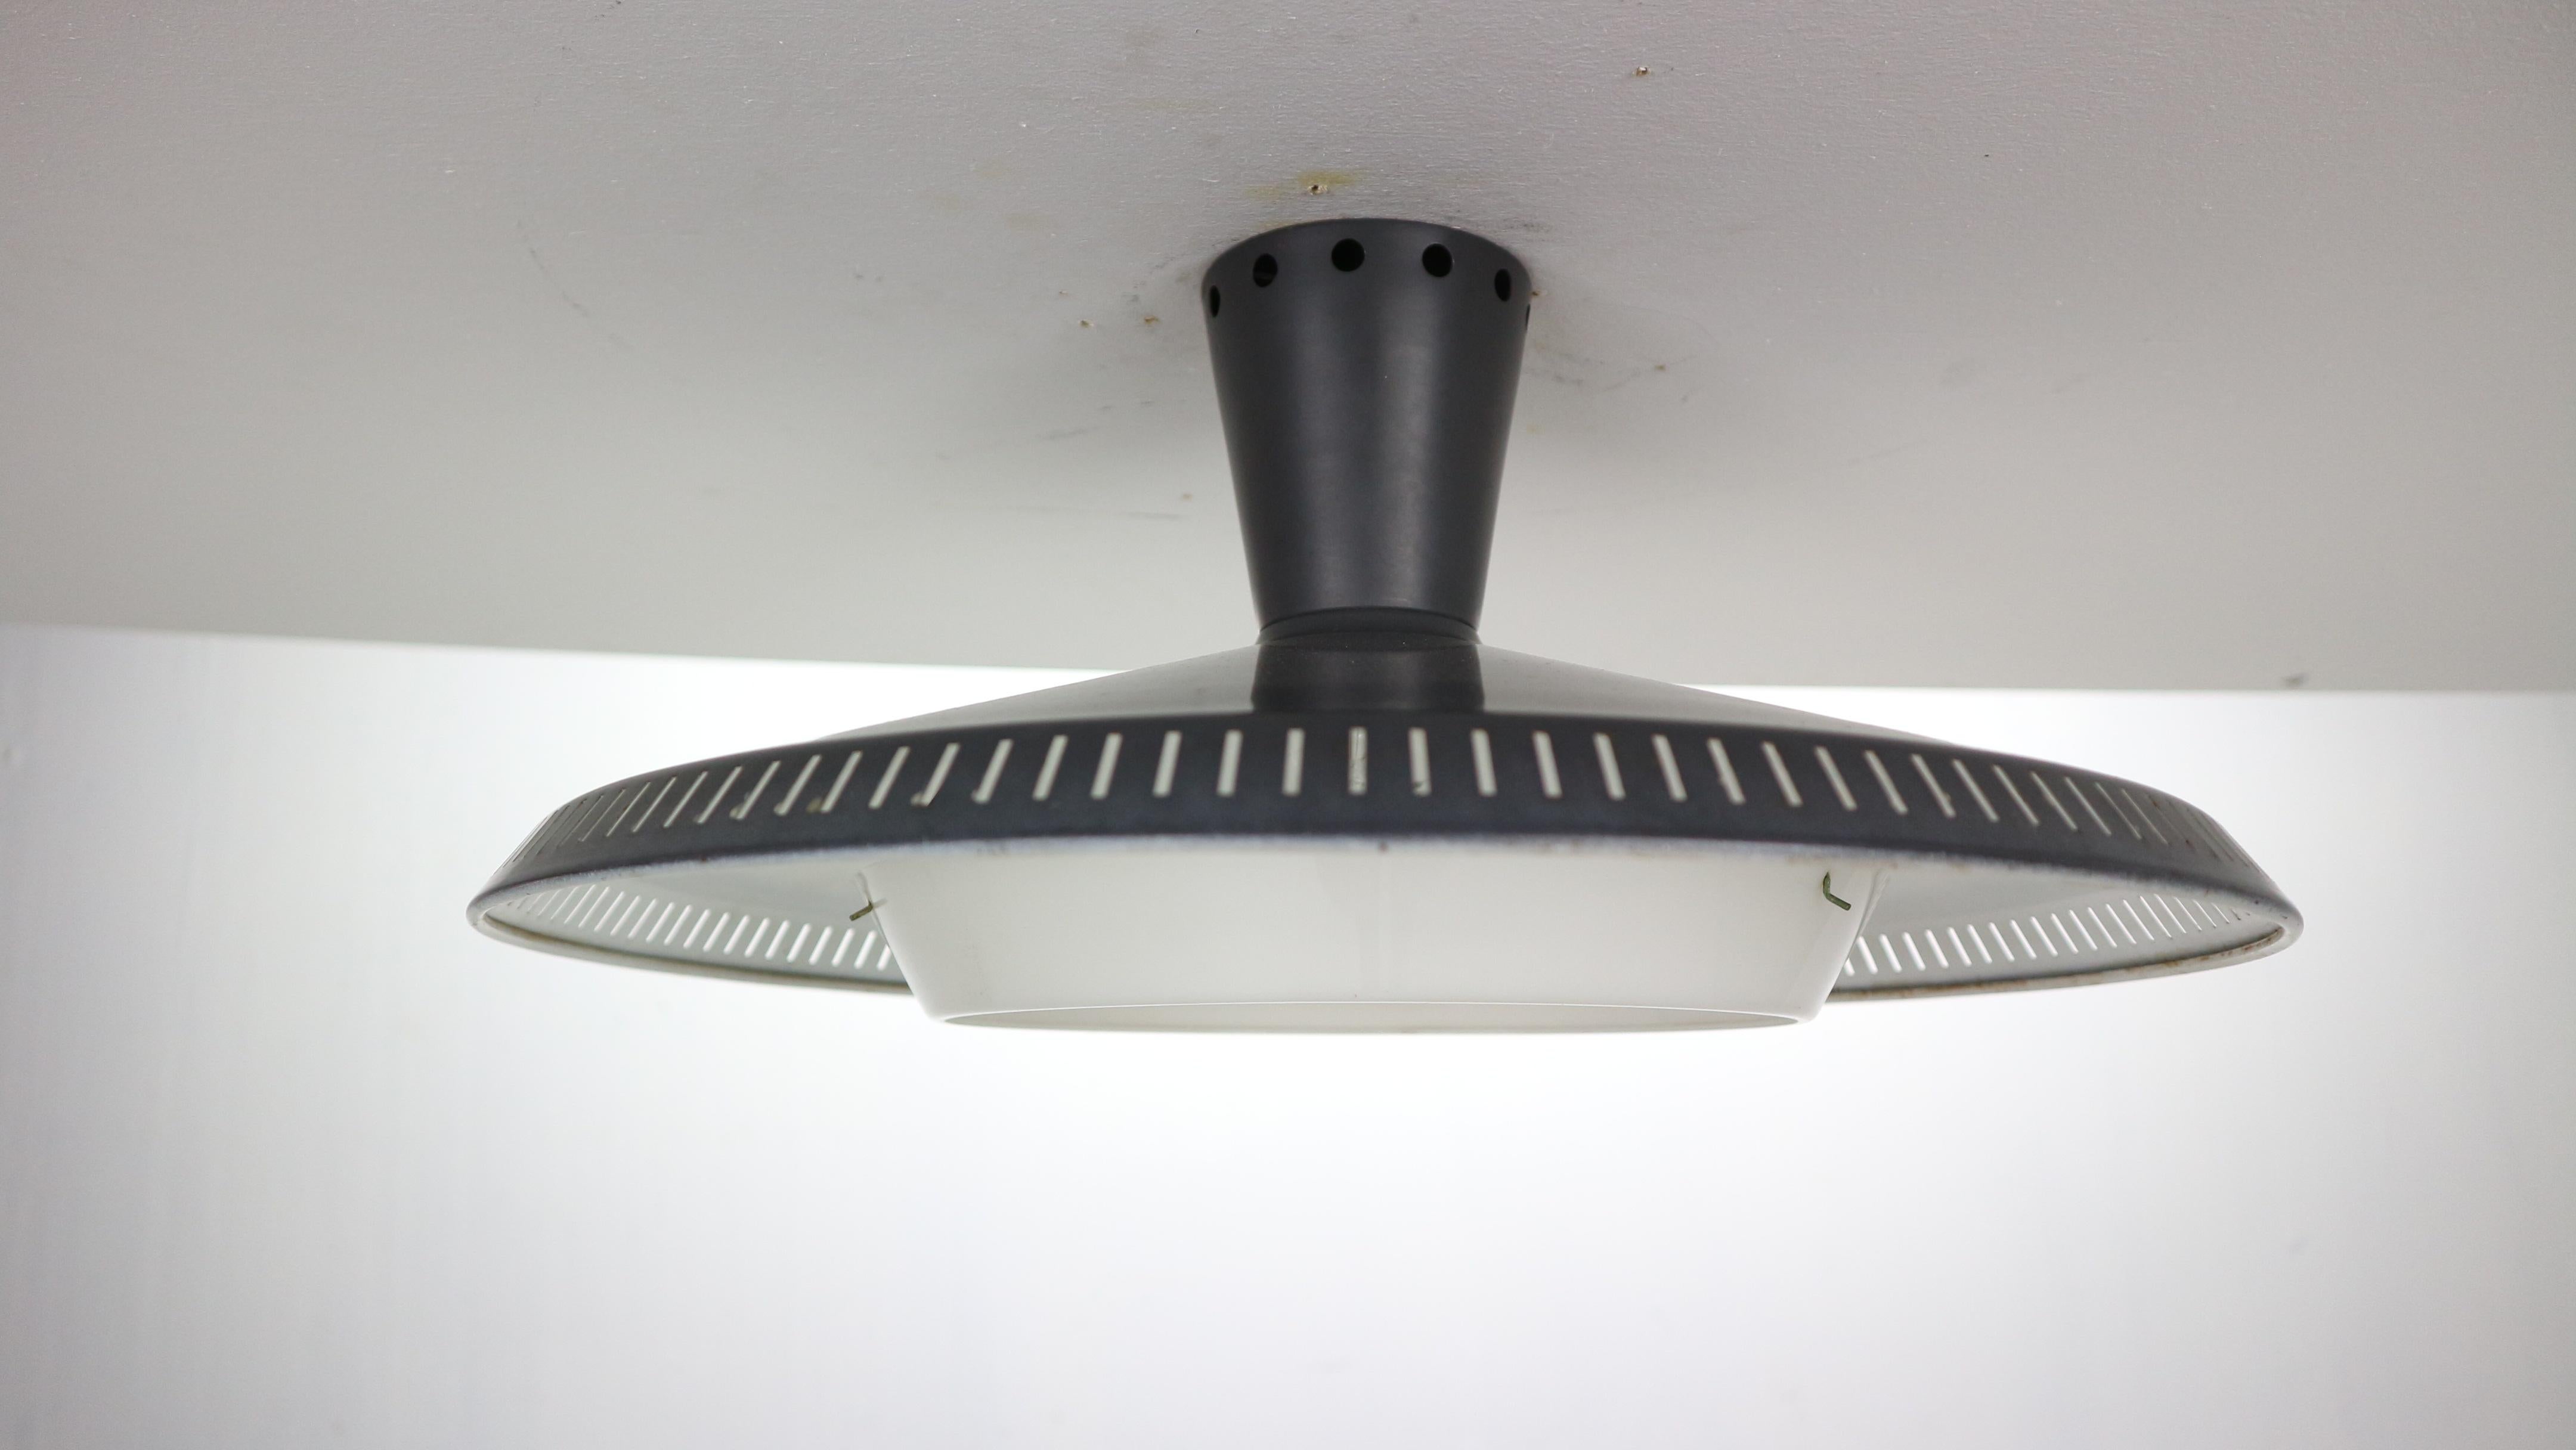 Iconic wall or celling lamp designed by Louis Kalff for Philips famous Dutch lightening manufacture in 1959, Netherlands.
Model no. NB92, completely original with an original label.
The shade of the lamp is made of perforated metal and has a dark